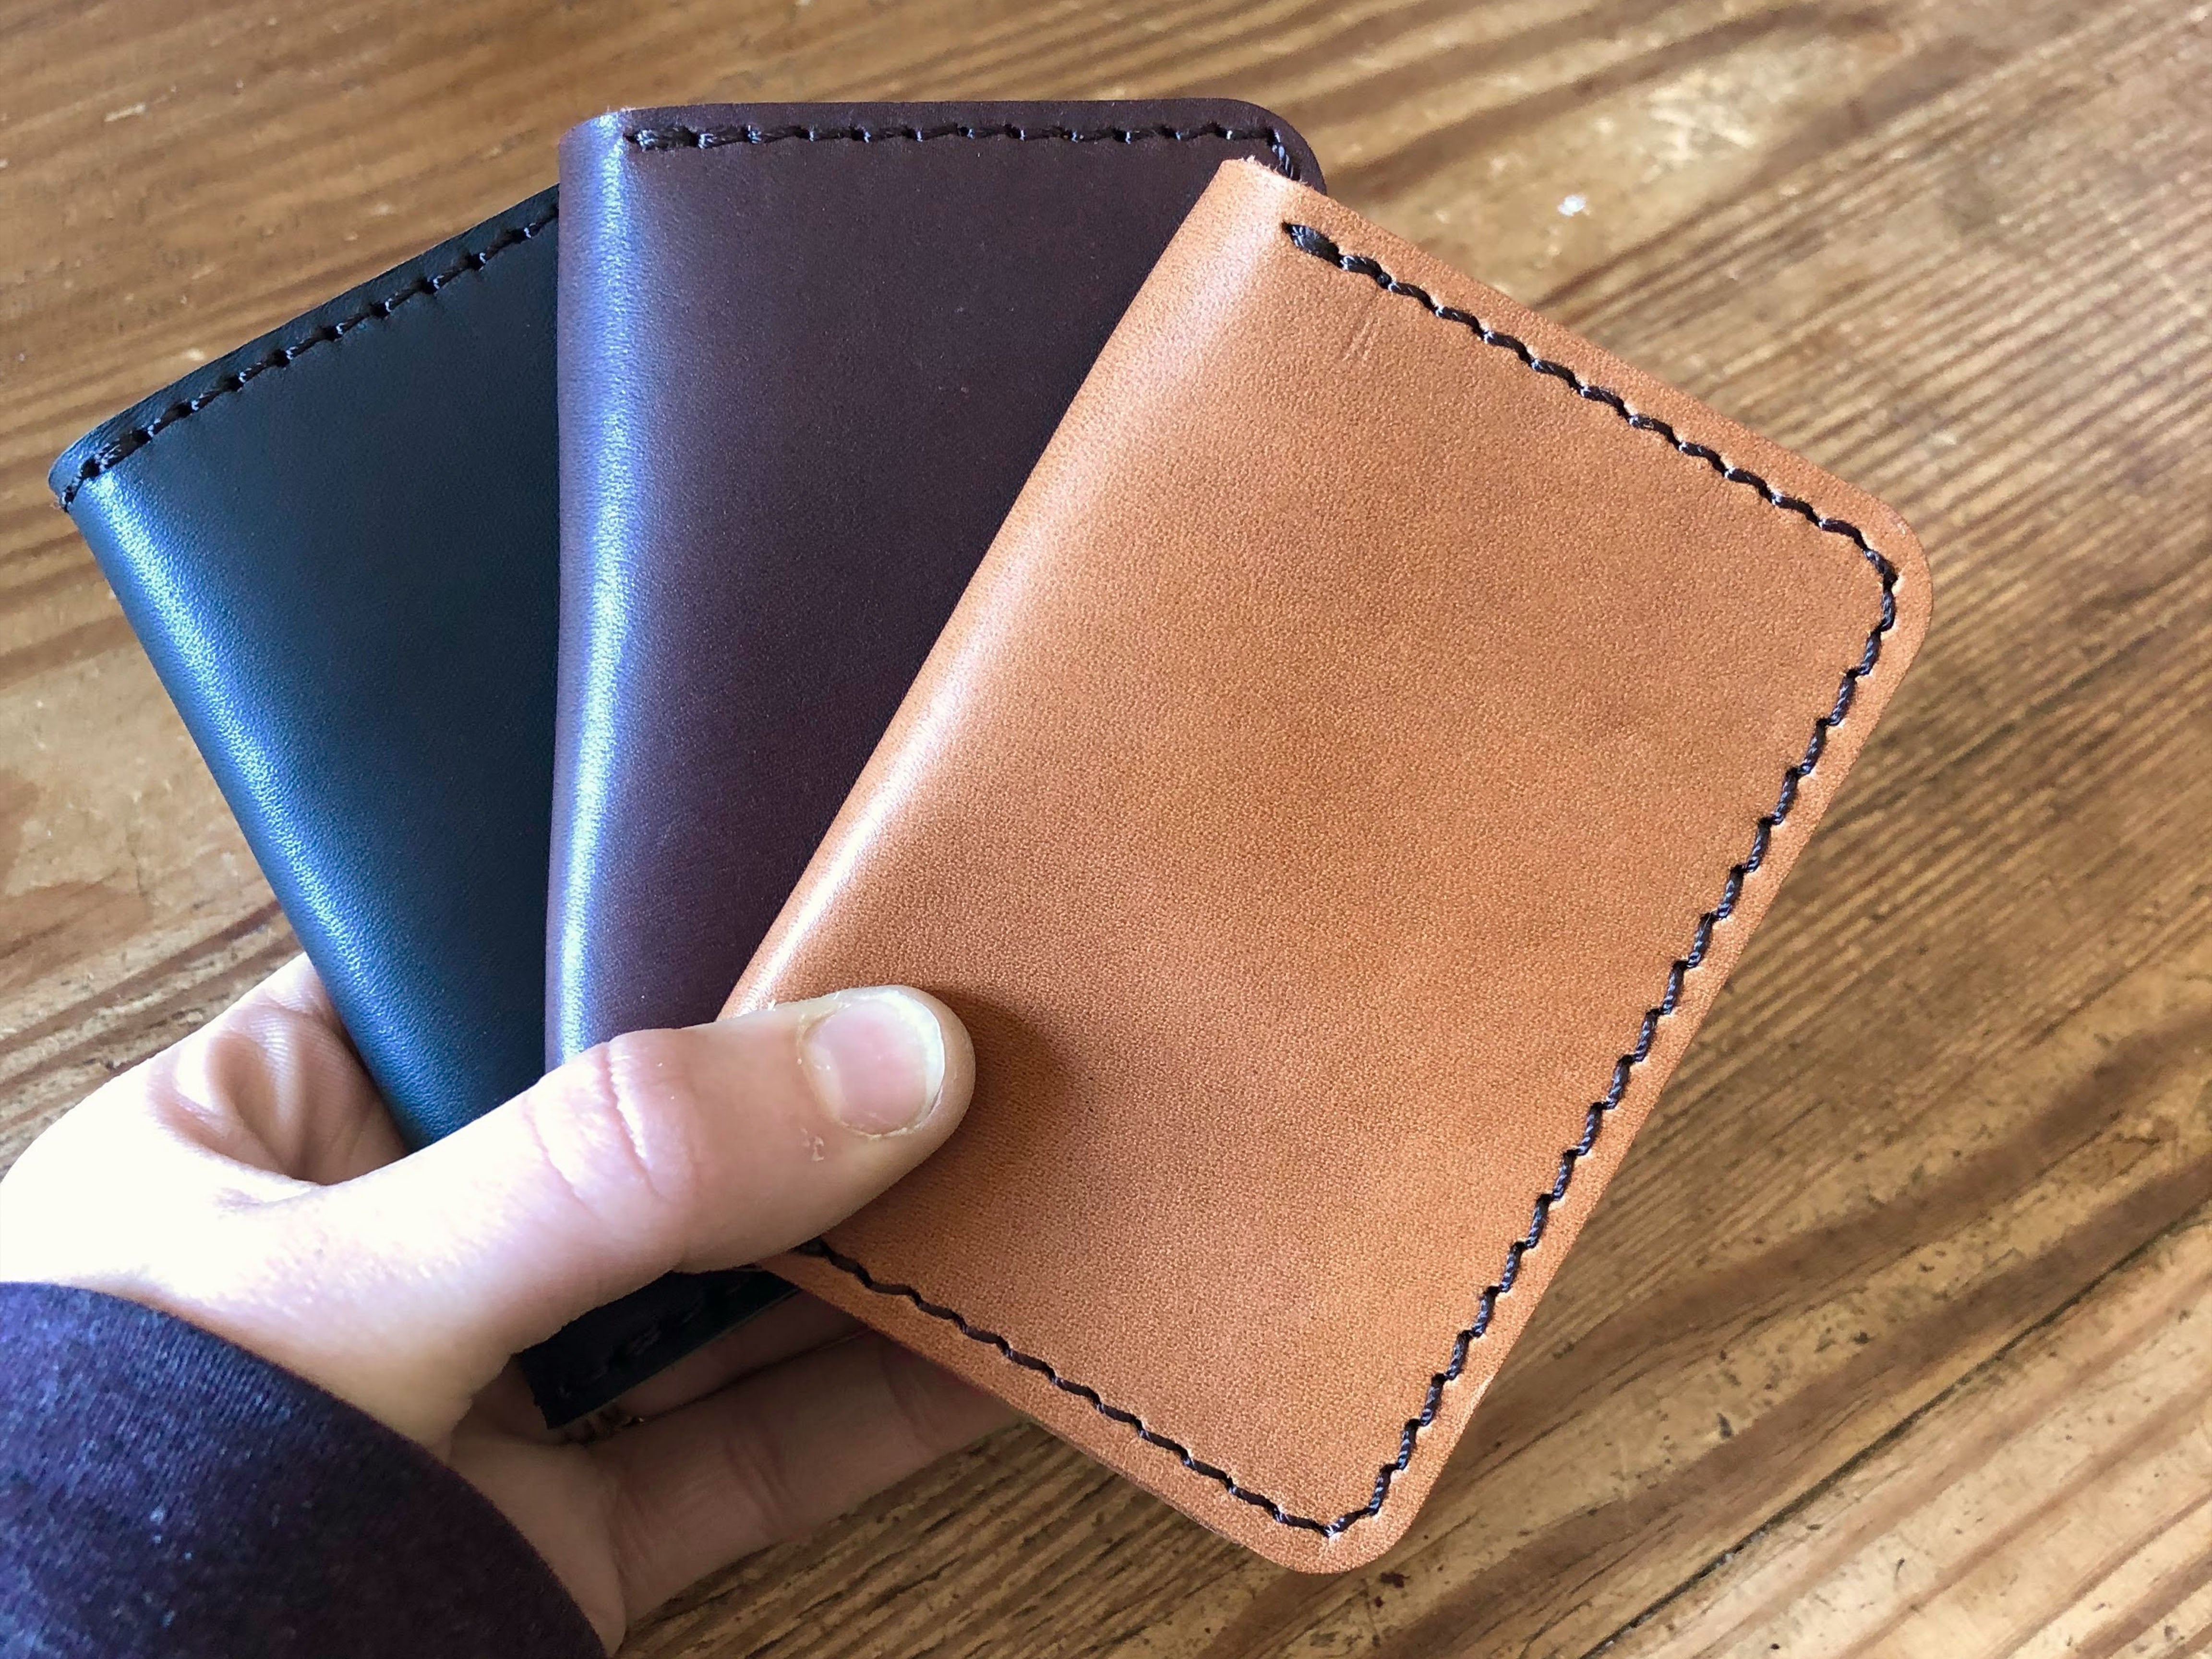 Leather Business Card Holder